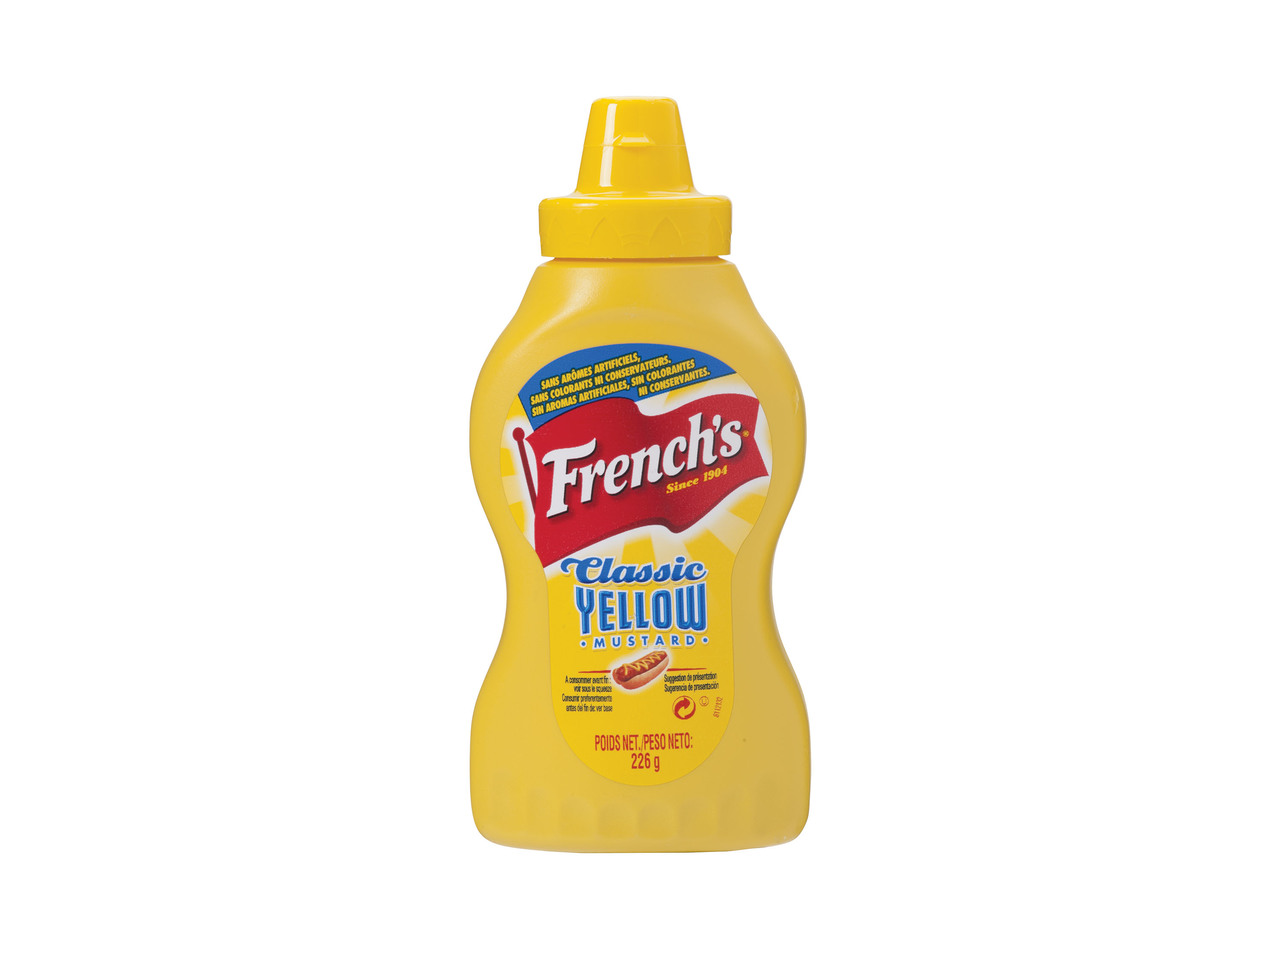 French's moutarde Classic Yellow1